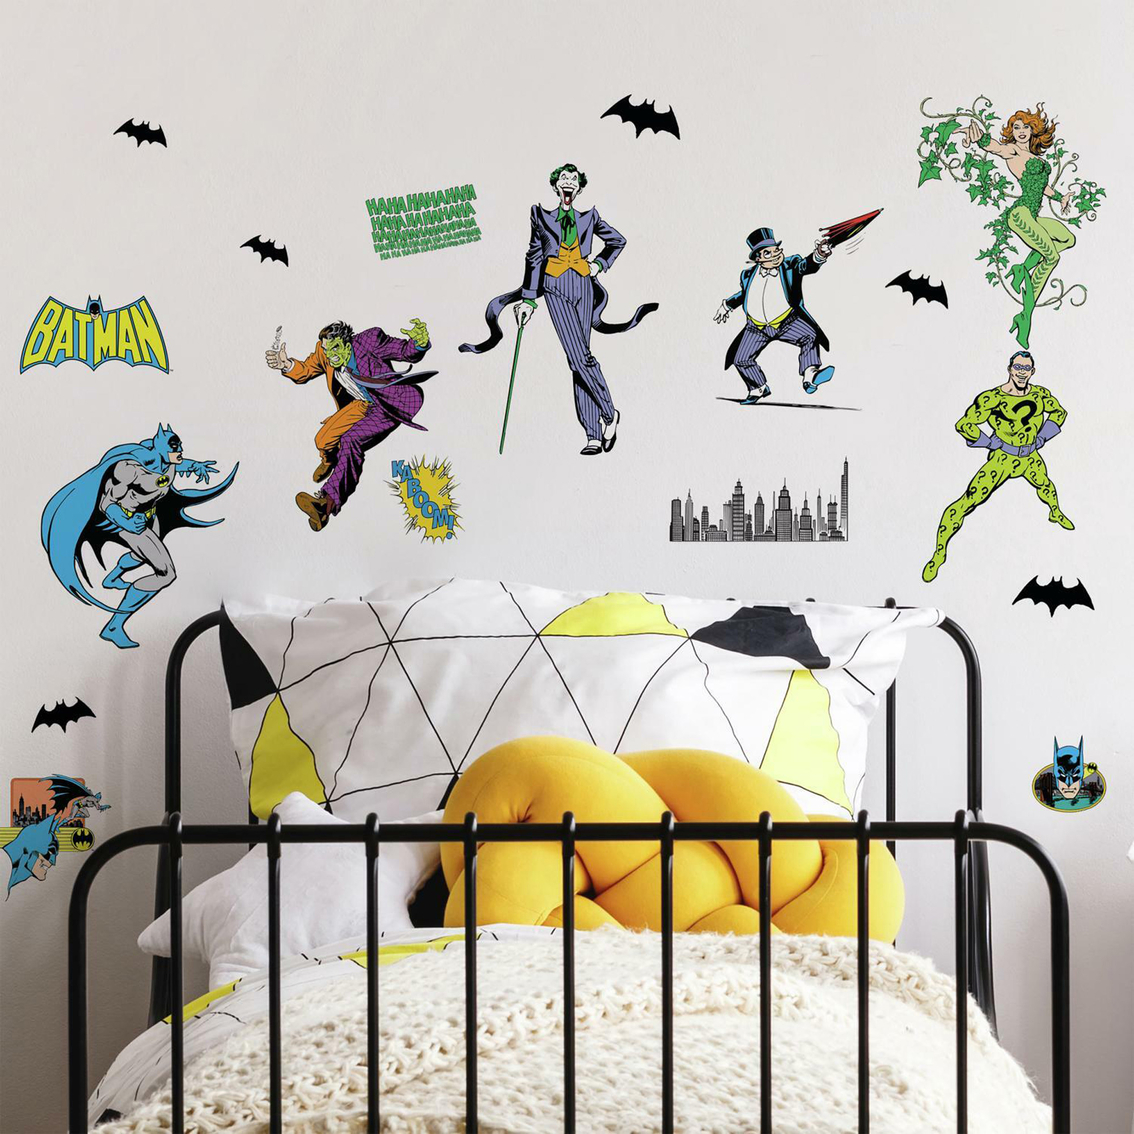 Roommates Batman Villains Peel and Stick Wall Decals - Image 3 of 5